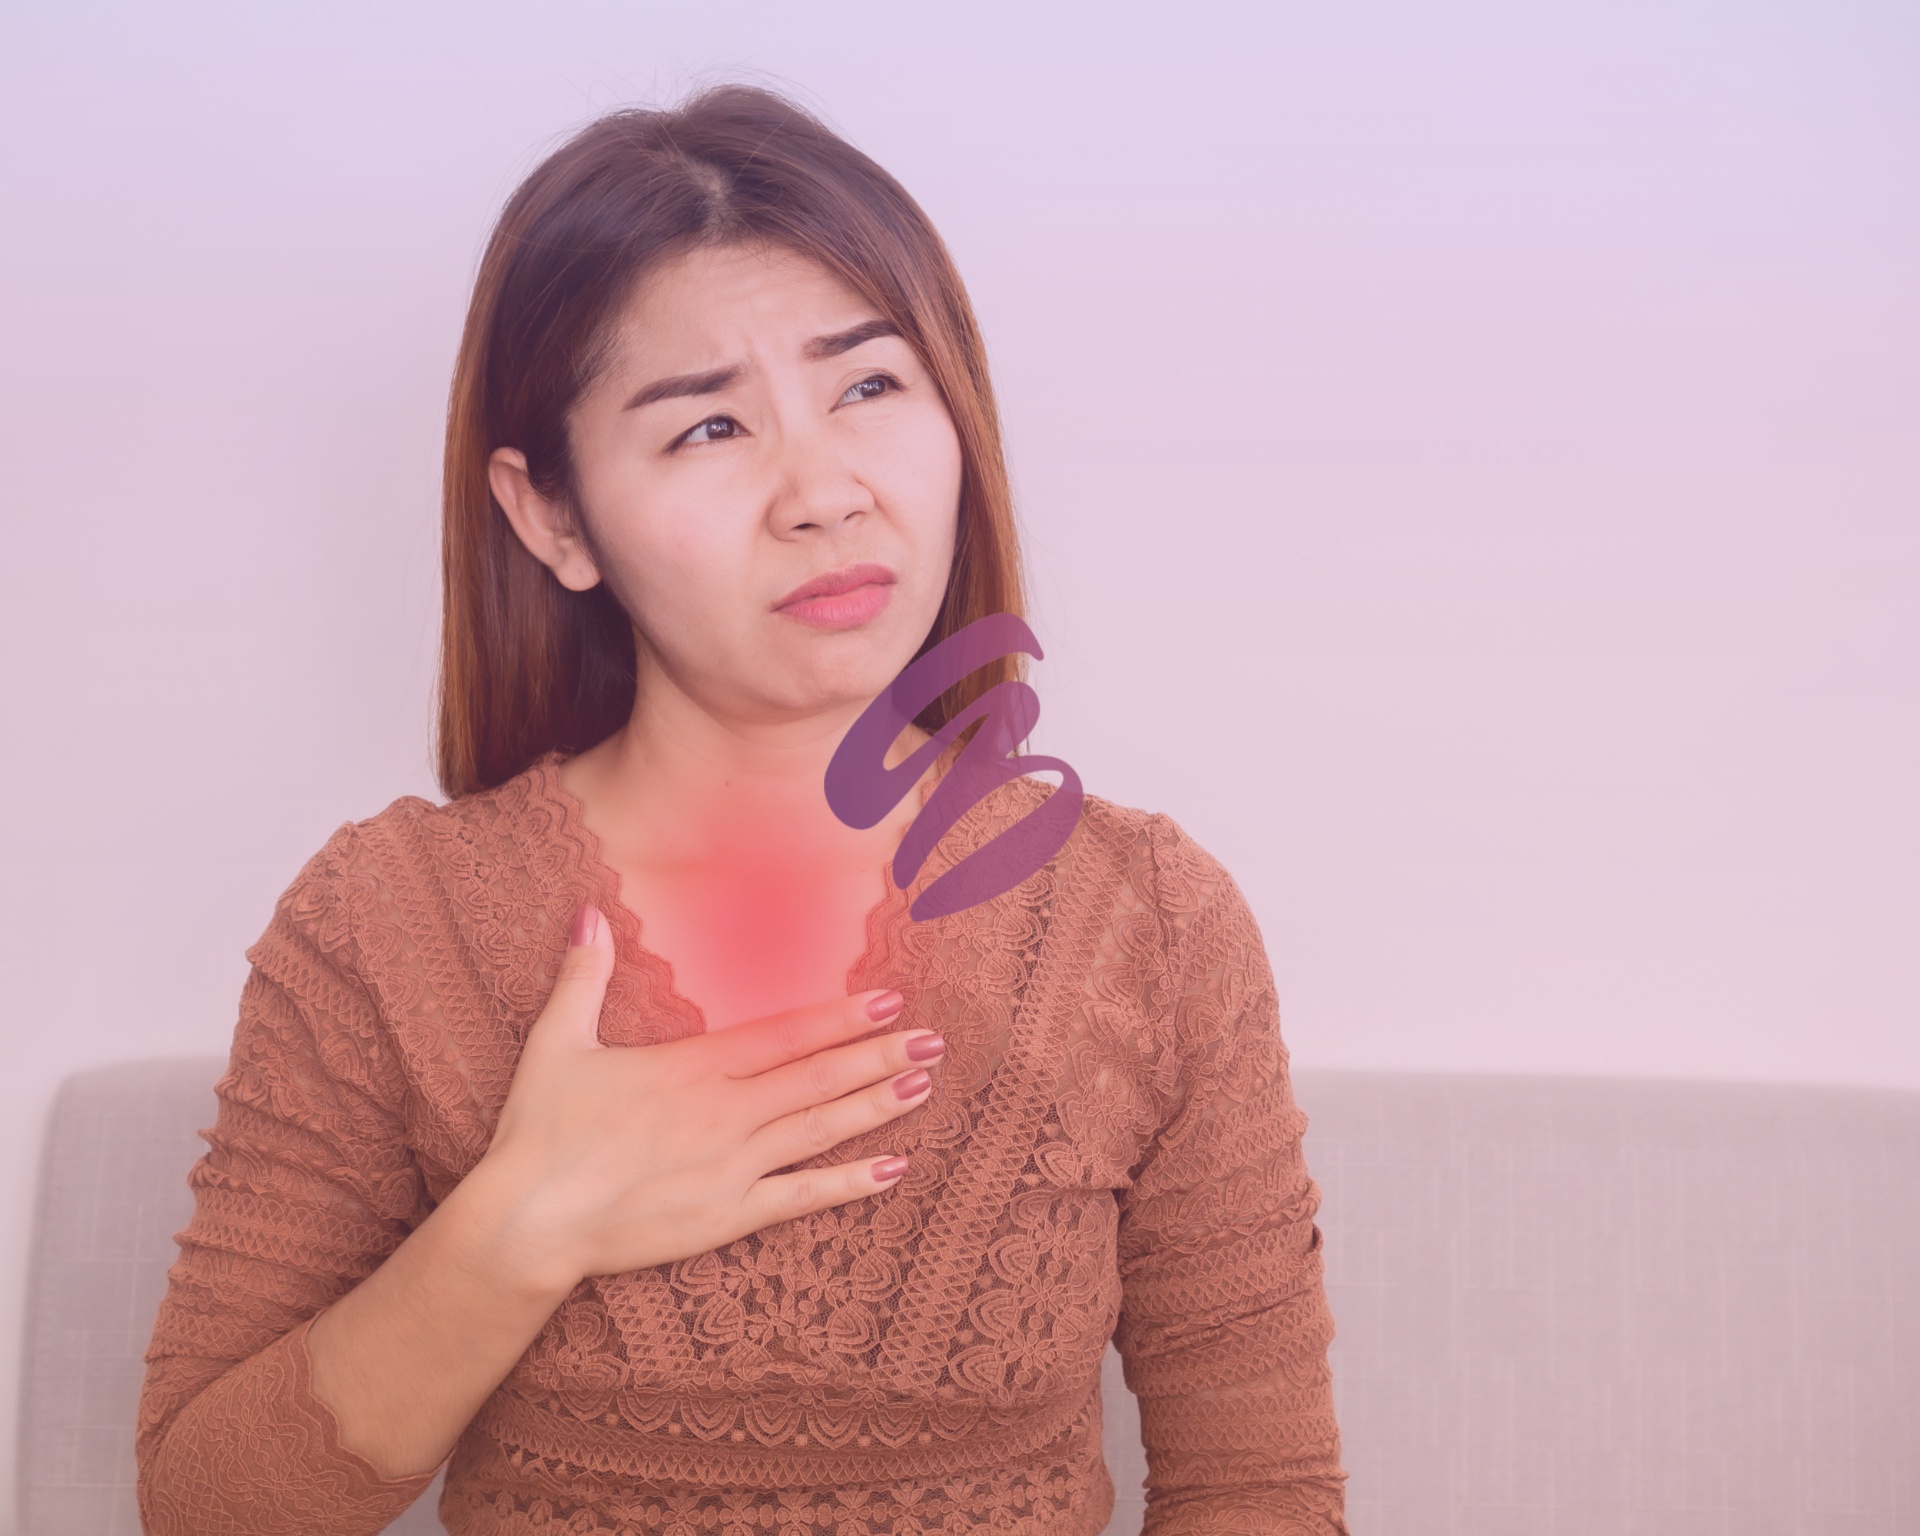 woman holding chest experiencing acid reflux